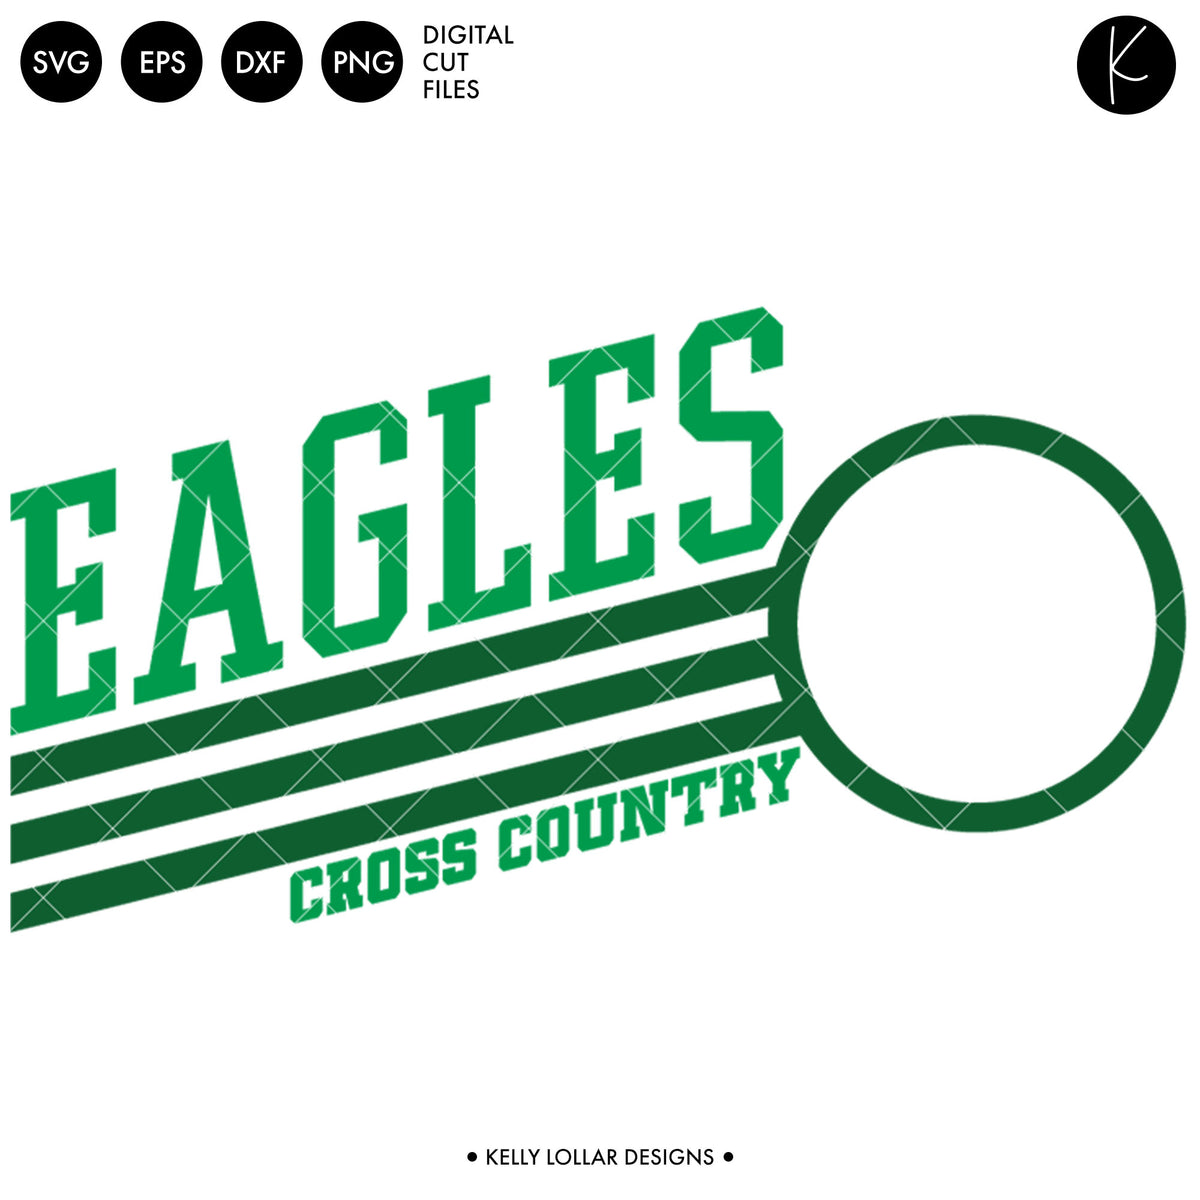 Eagles Cross Country Bundle | SVG DXF EPS PNG Cut Files